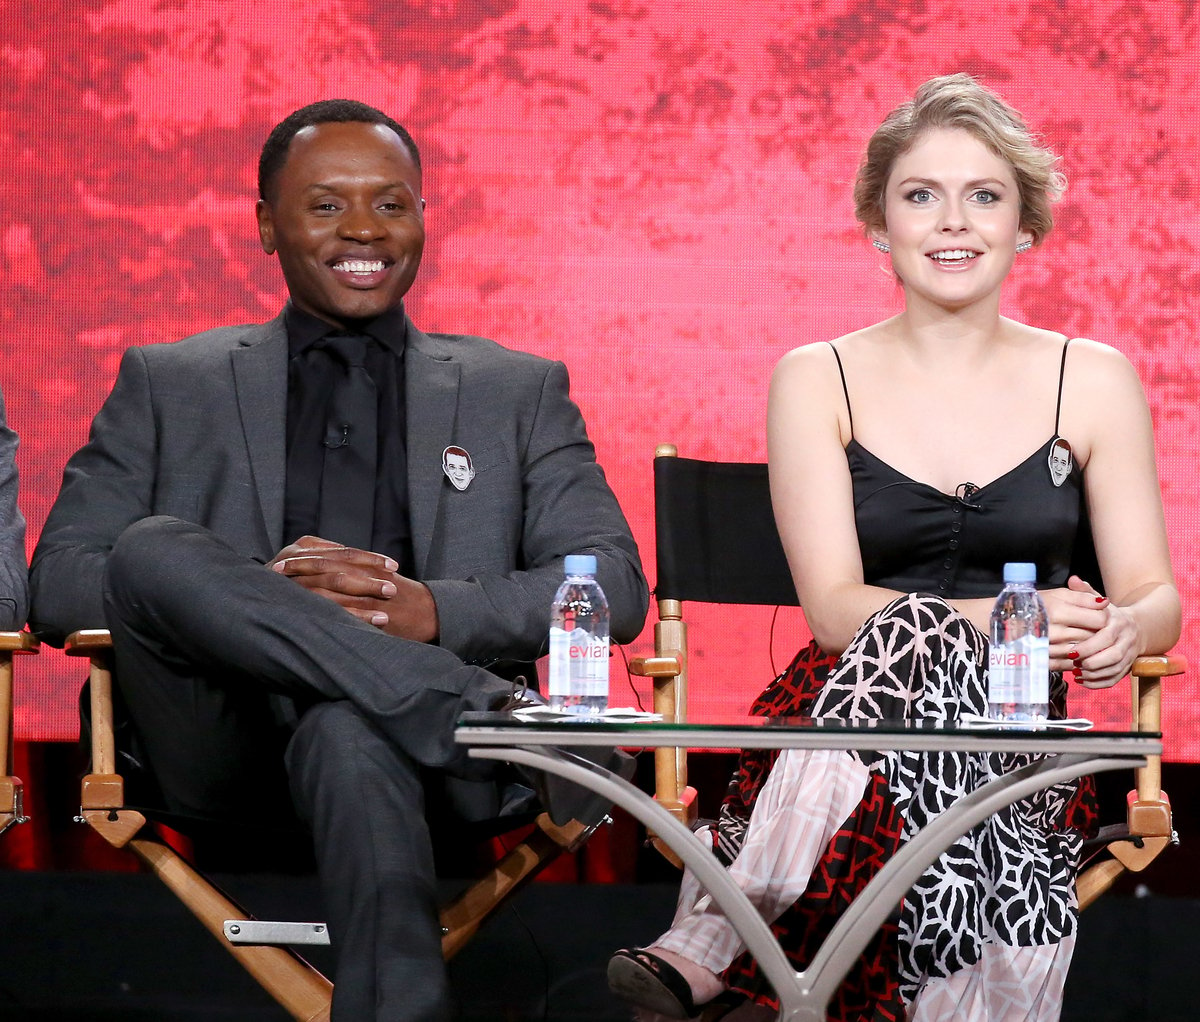 Malcolm Goodwin and 'Ghosts' star Rose McIver from 'iZombie' TV show at 2017 Winter TCA Tour Panels